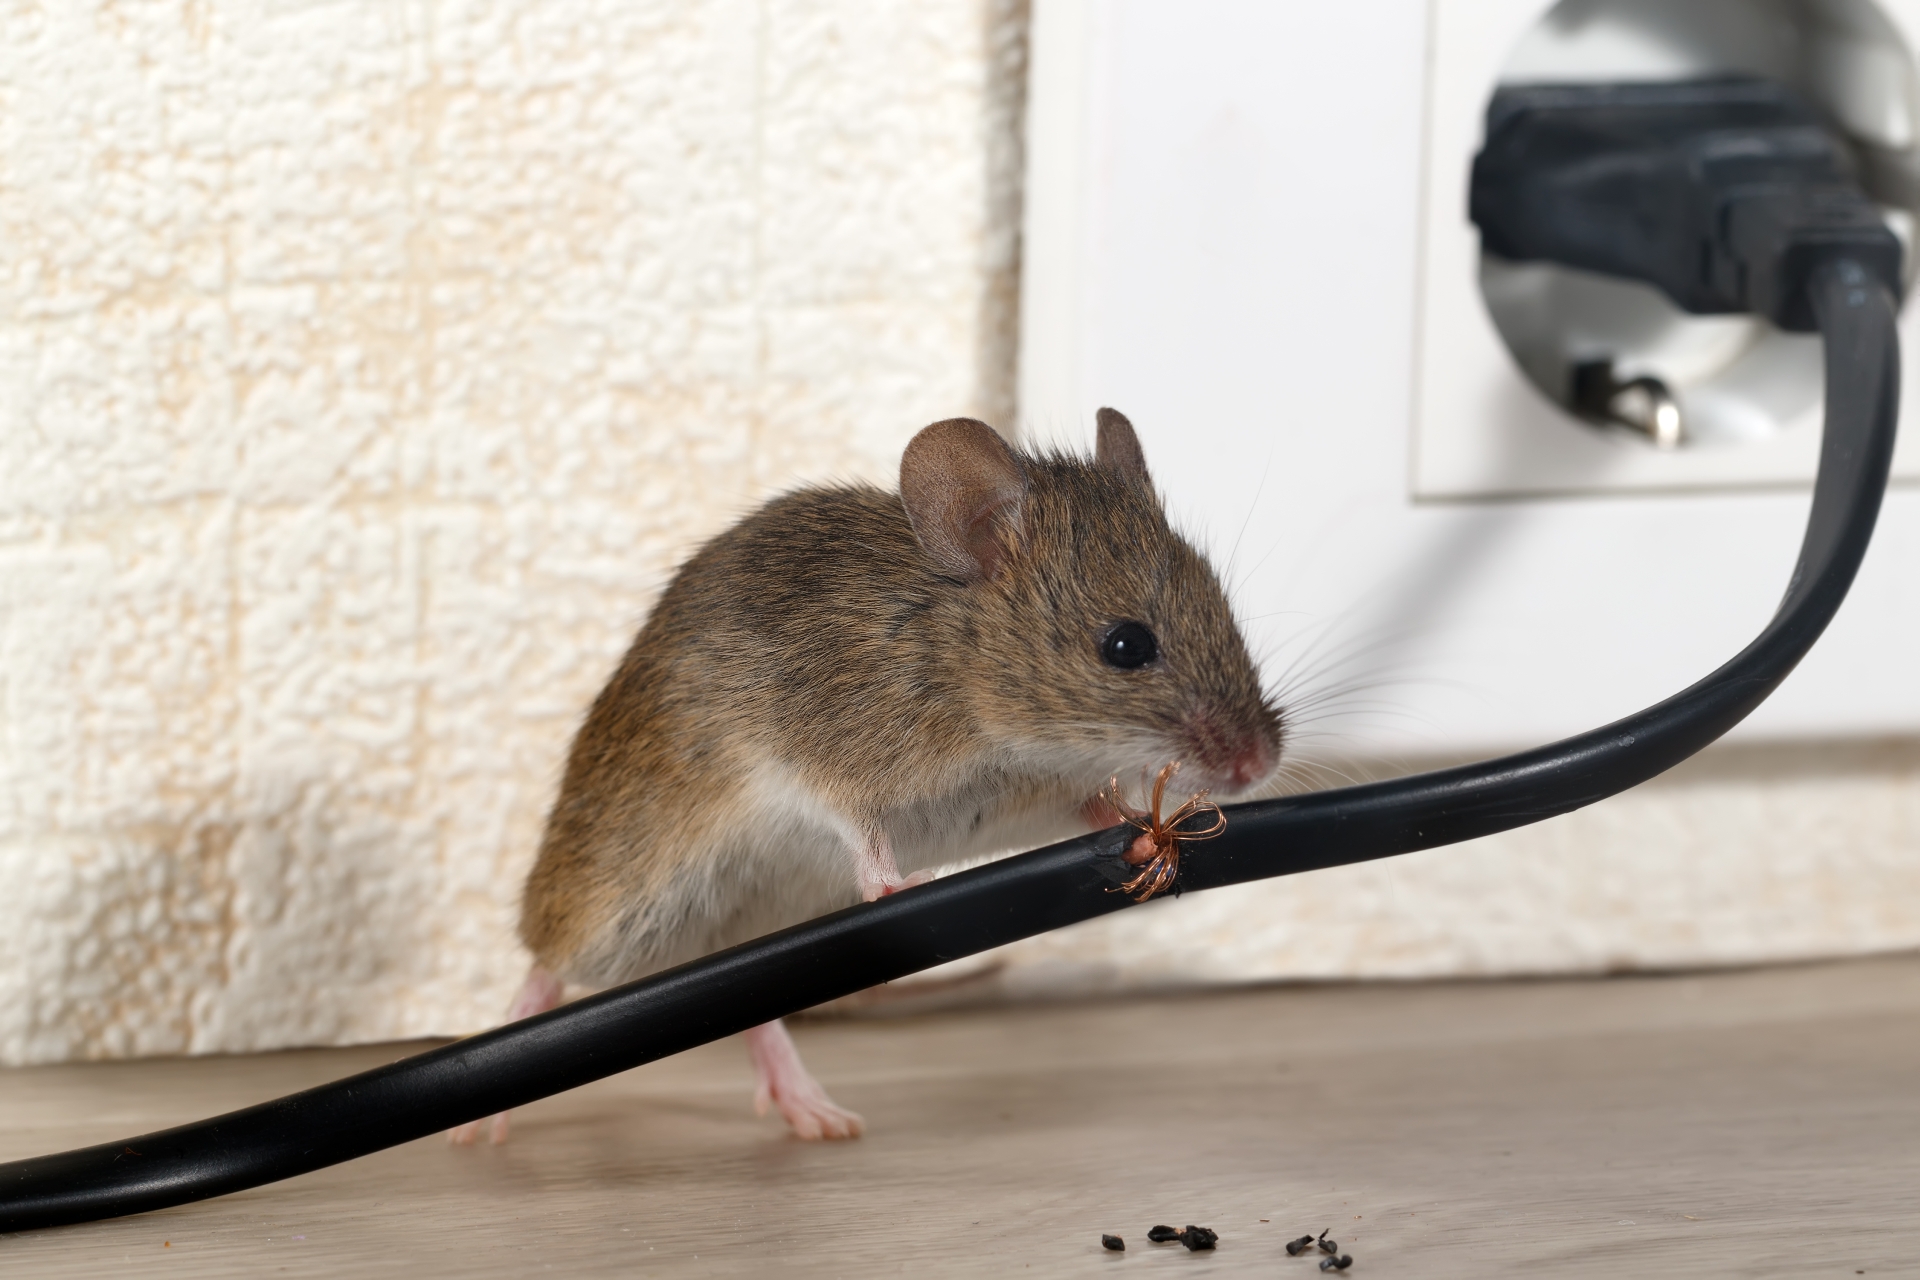 Mice Infestation, Pest Control in Ponders End, Enfield Wash, EN3. Call Now 020 8166 9746